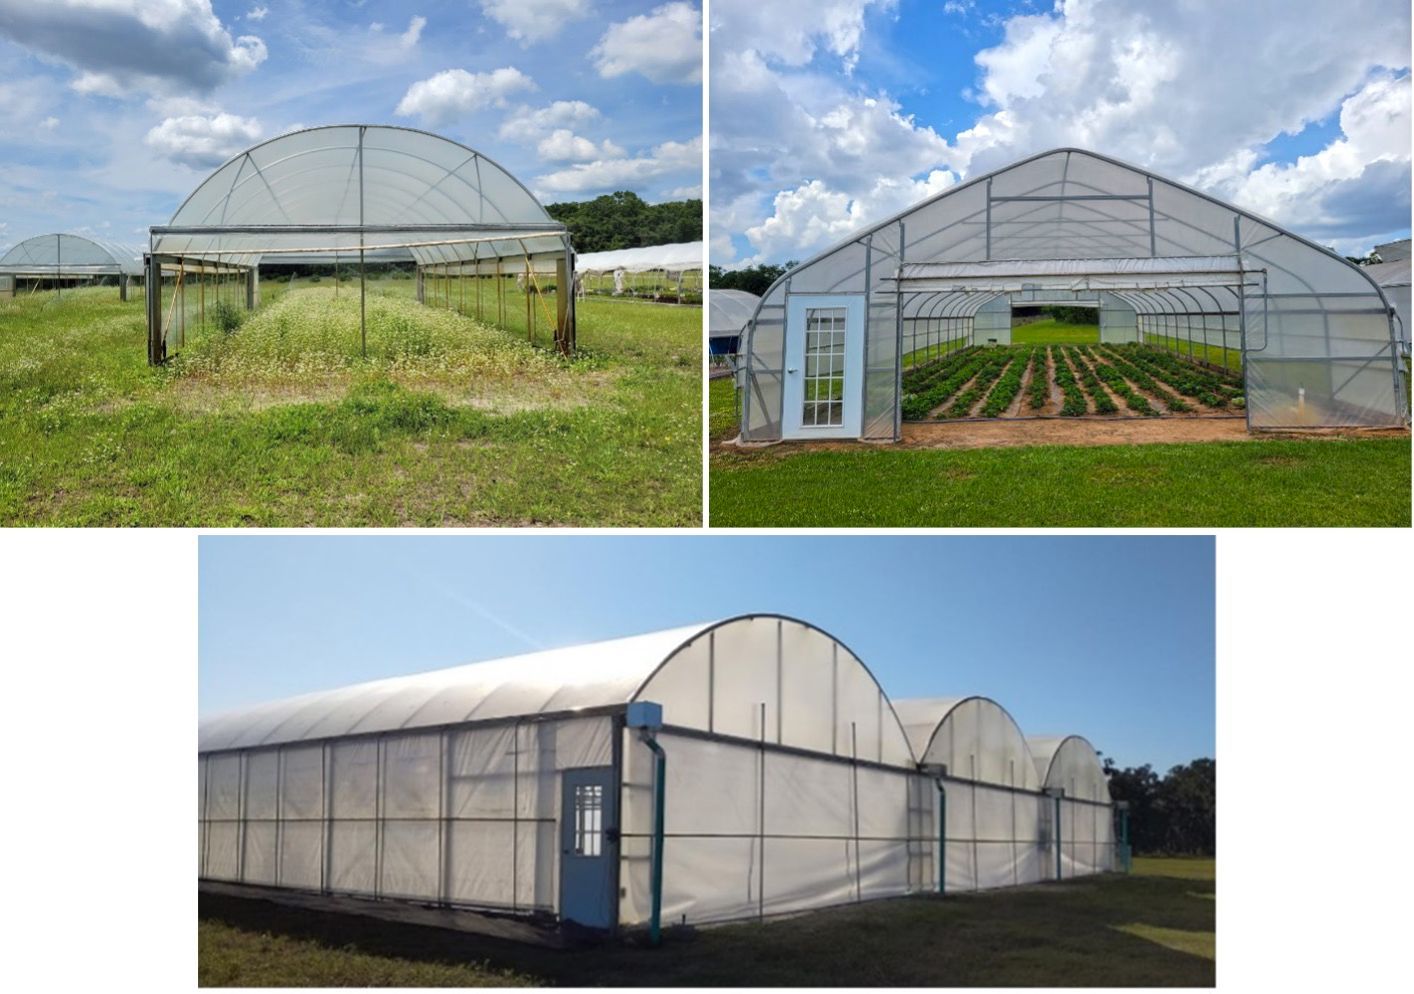 Various styles of high tunnels. Clockwise from the top left: Quonset style, Gothic style, and multi-bay high tunnels. 